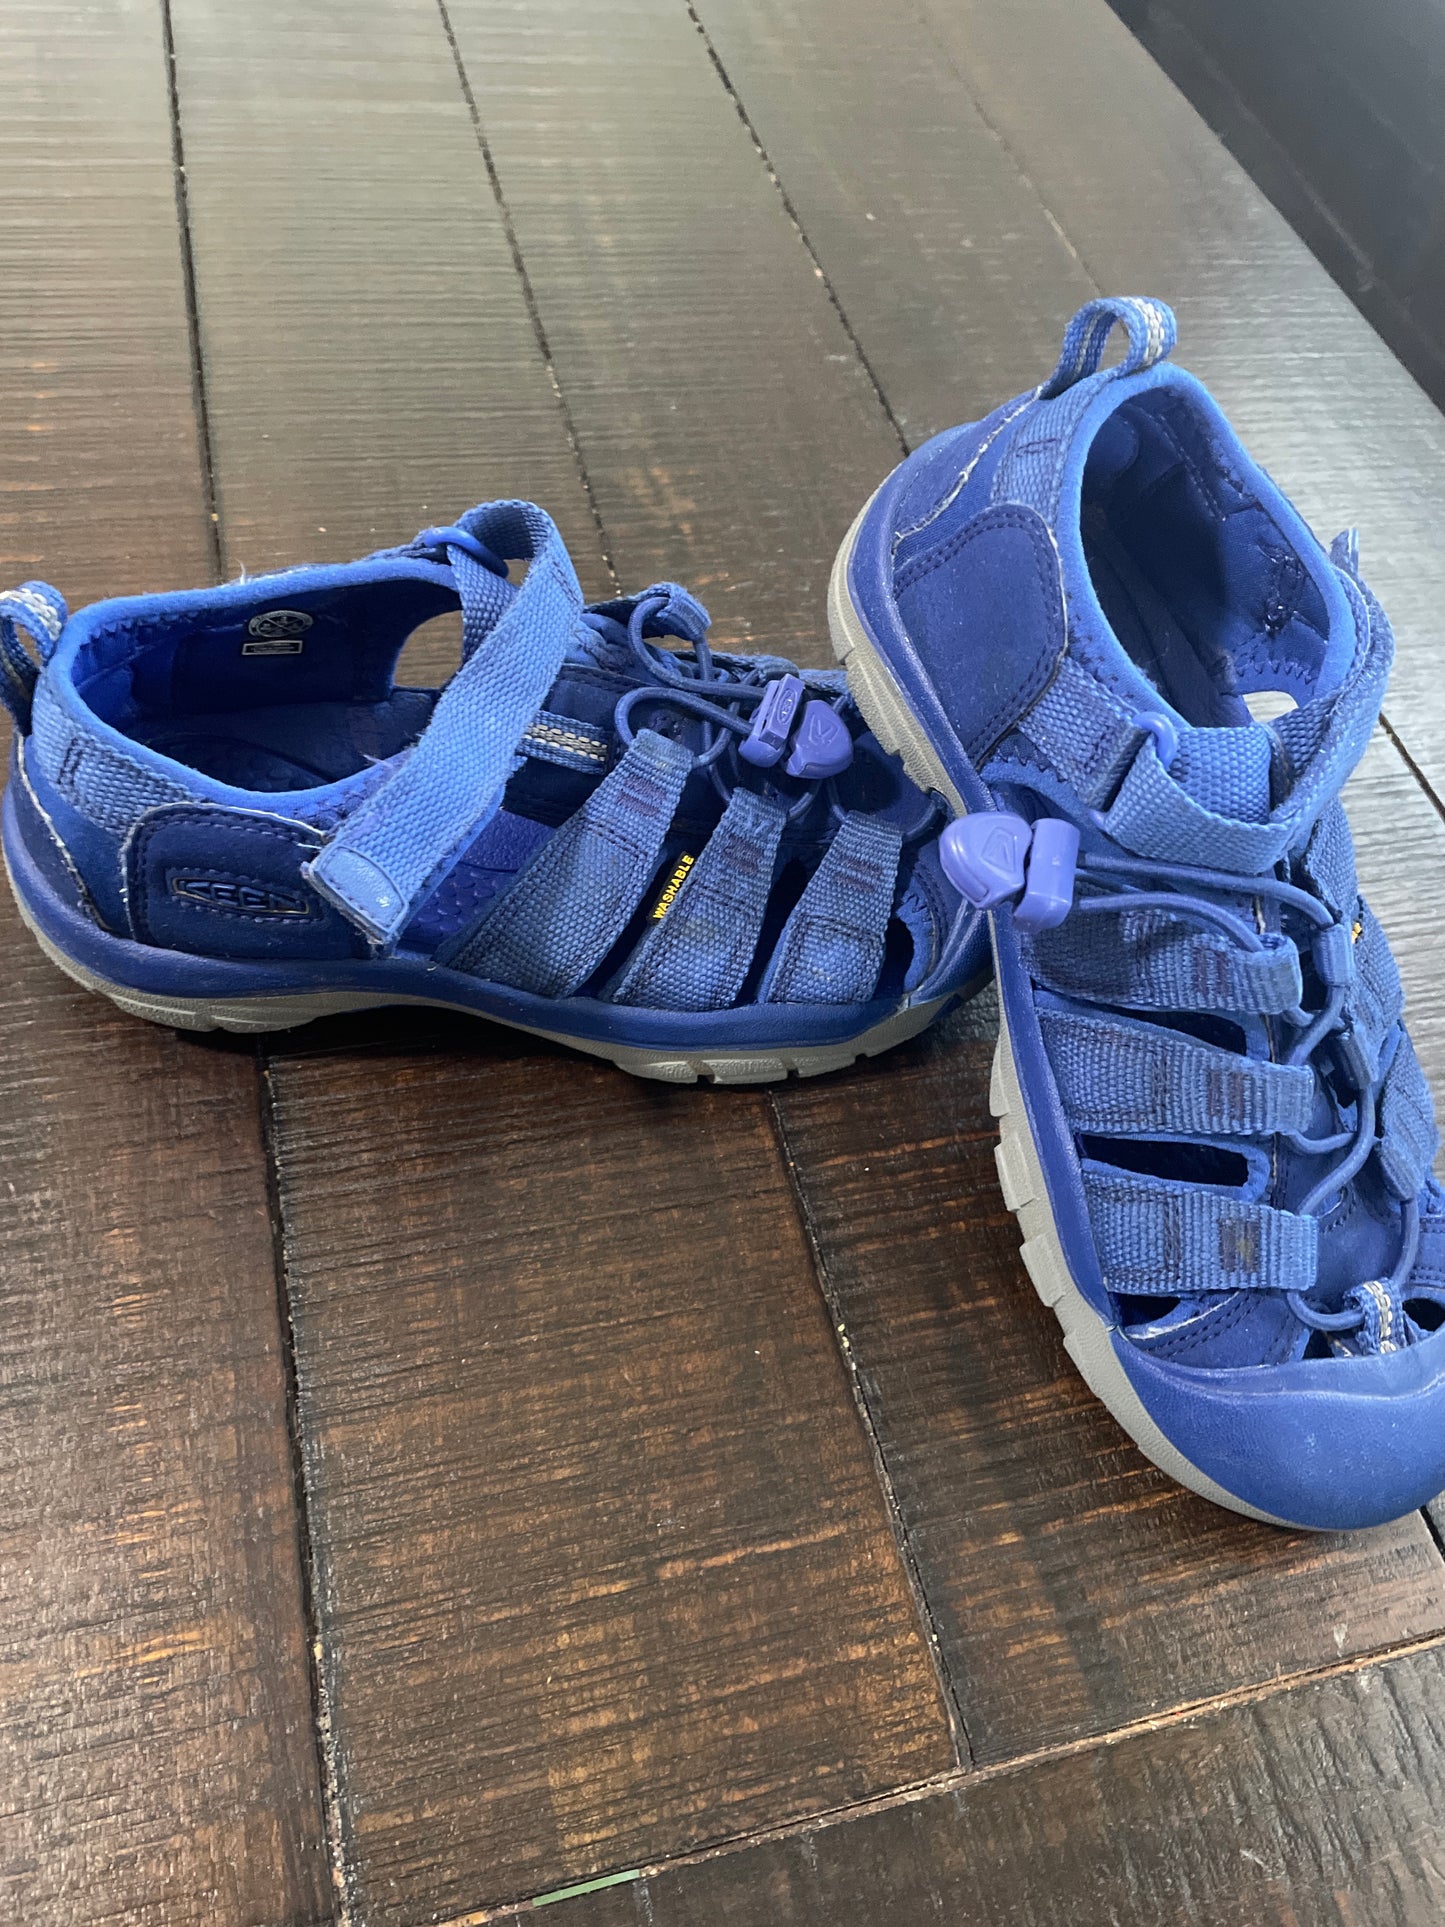 Kids Keen water shoes size 3